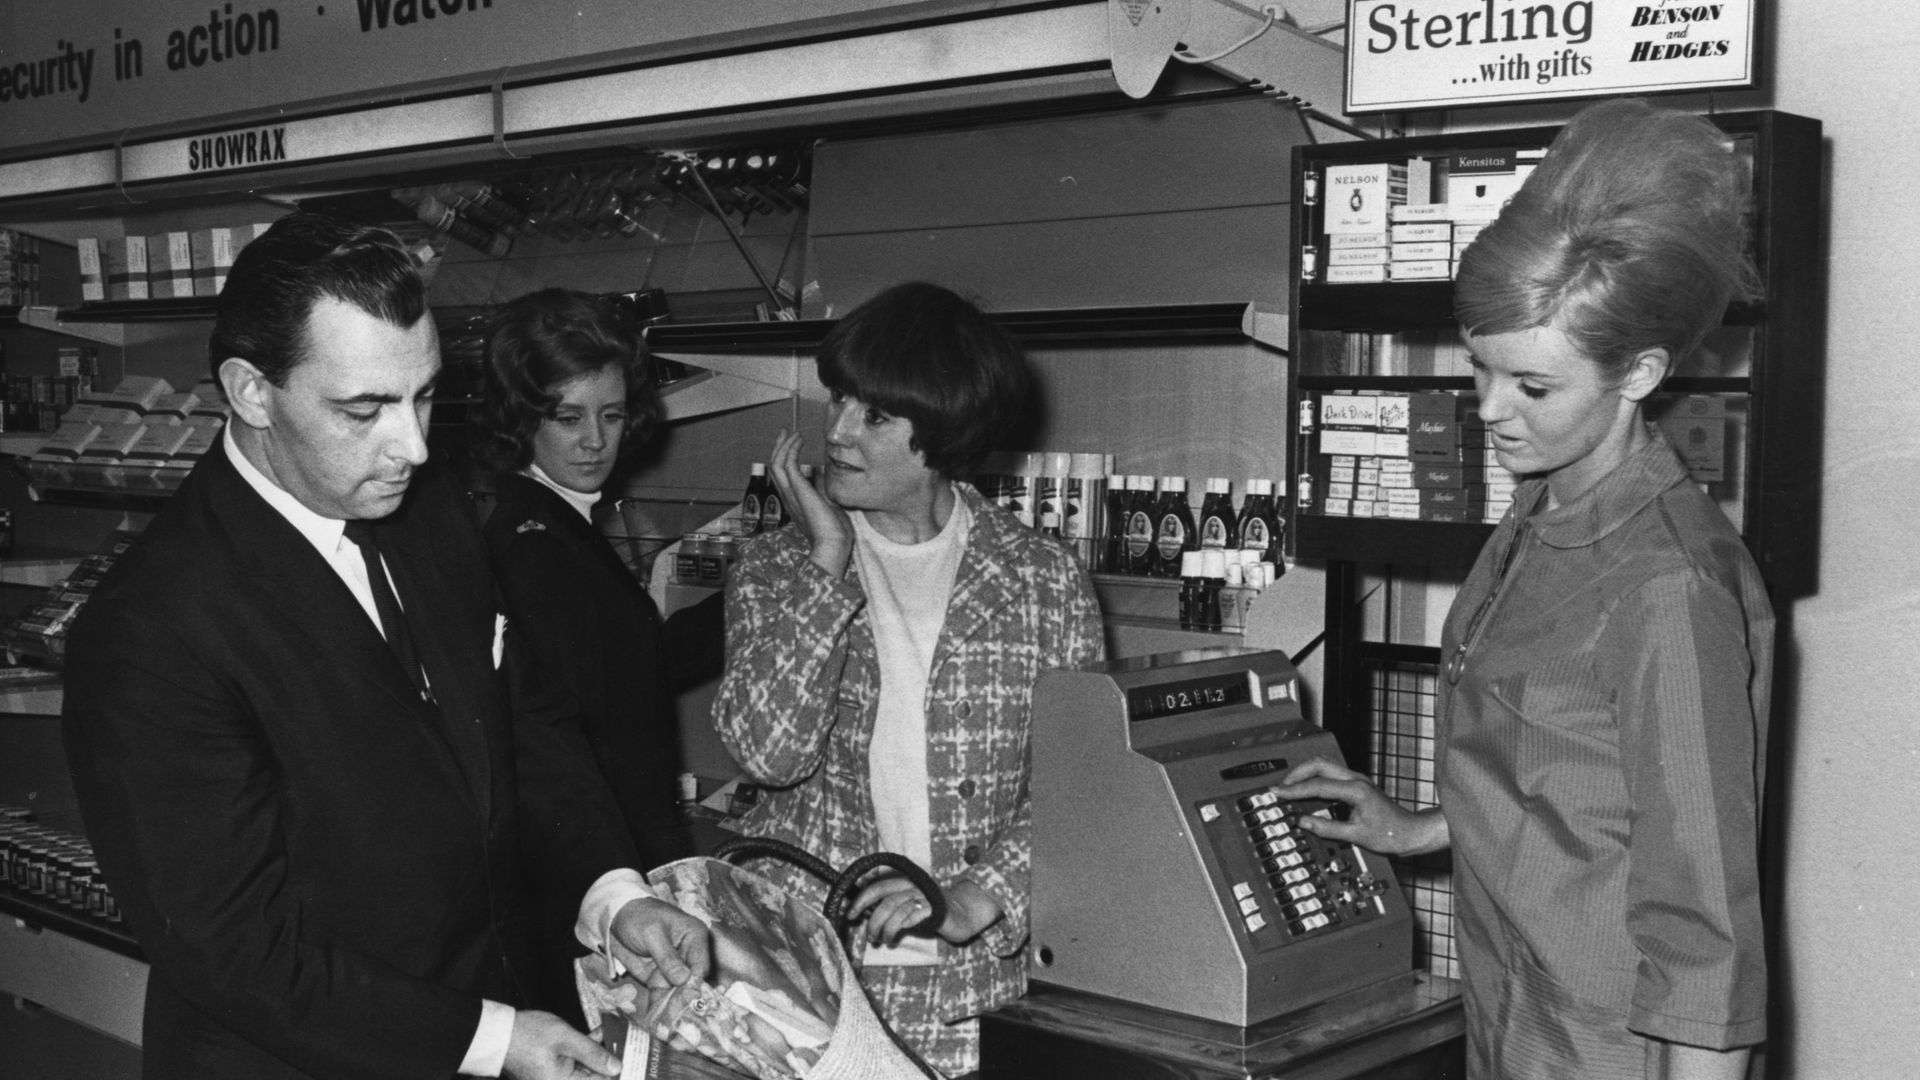 A store detective showing how a shop-lifter can use a false lining to hide stockings, during a demonstration at 'Shopshow International', Earl's Court, London - Credit: Photo by Keystone/Getty Images